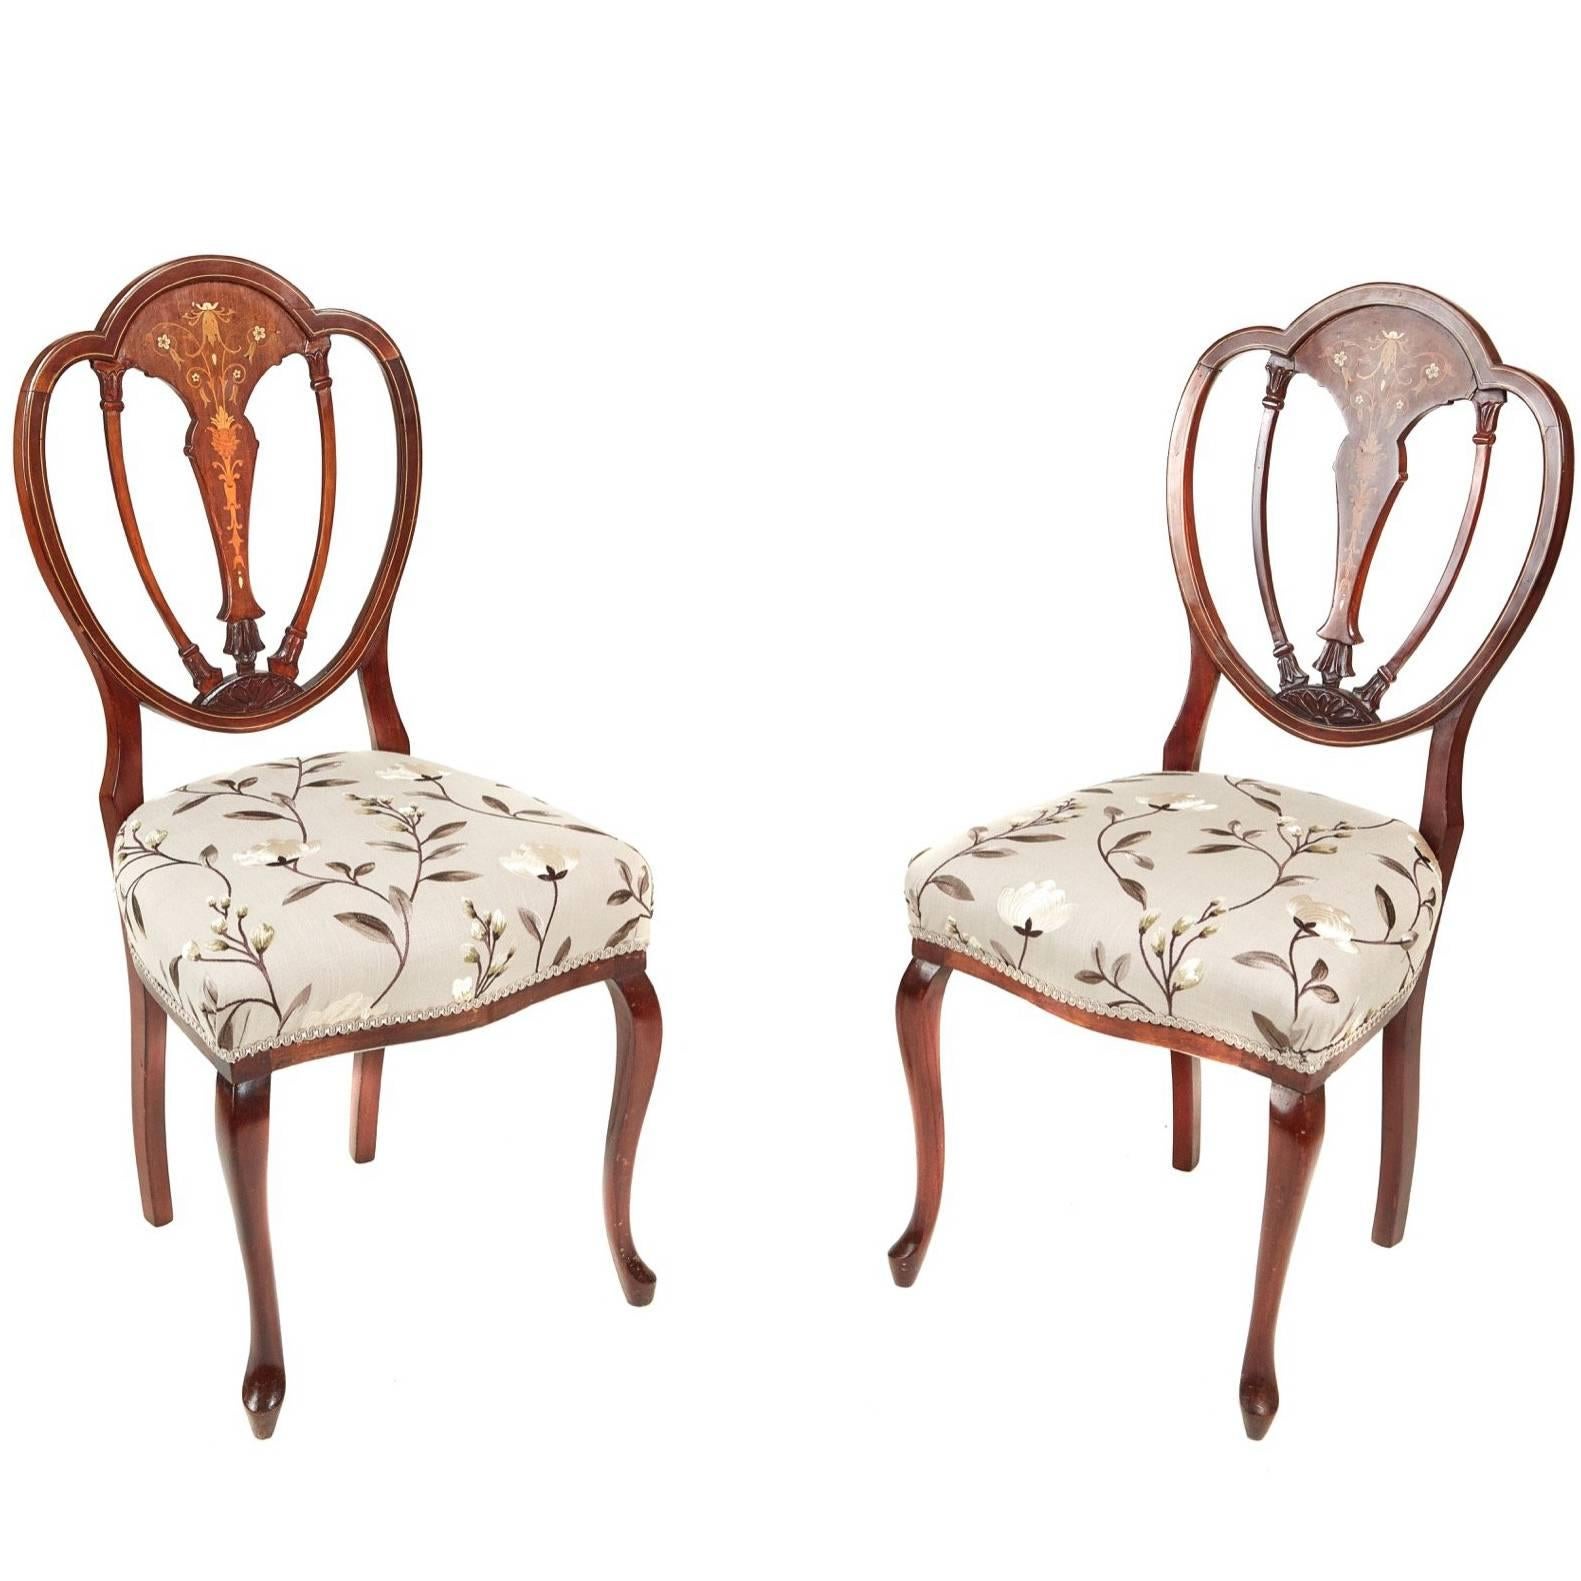 Pair of Mahogany Inlaid Side Chairs